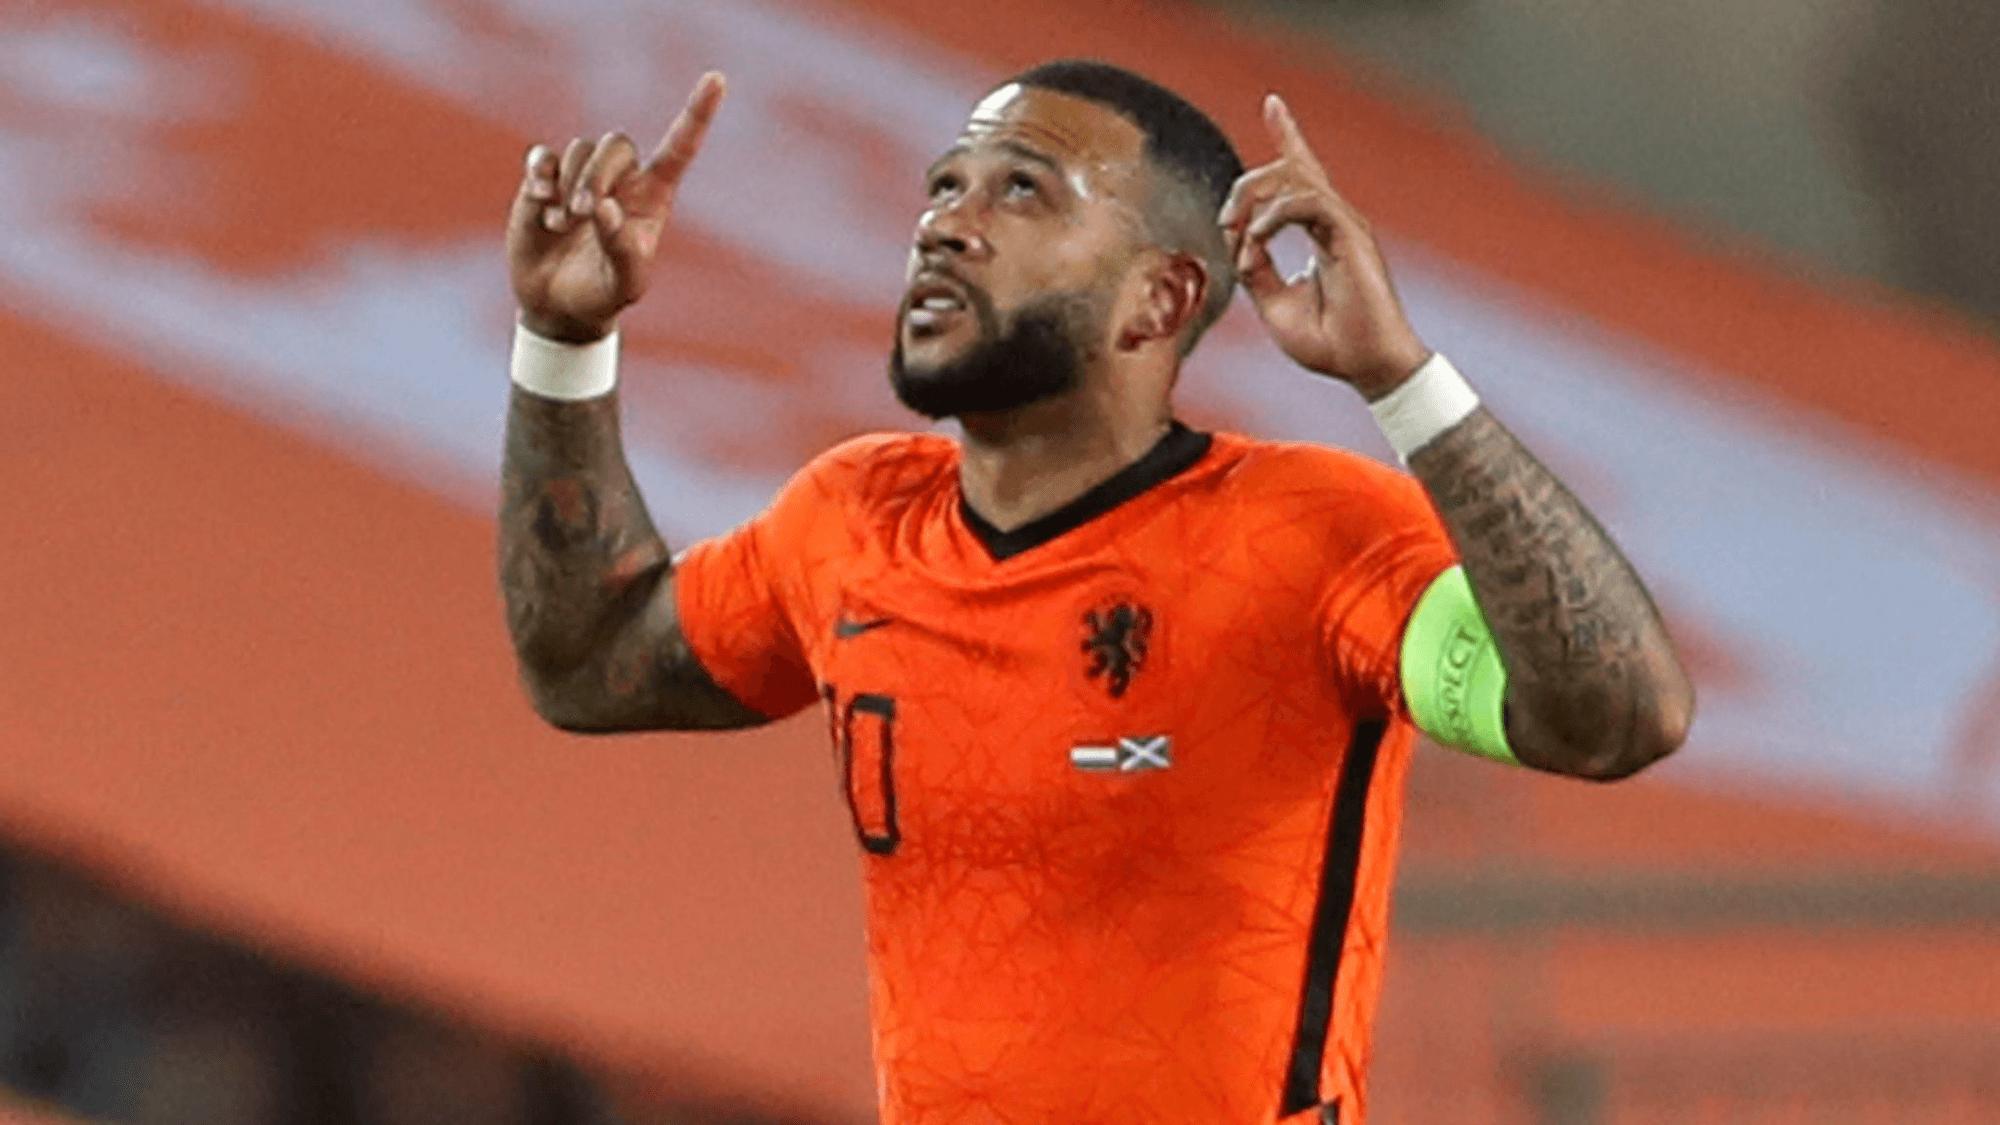 Euro 2020 Group C Preview: Resurgent Netherlands should dominate Group C in return to international stage